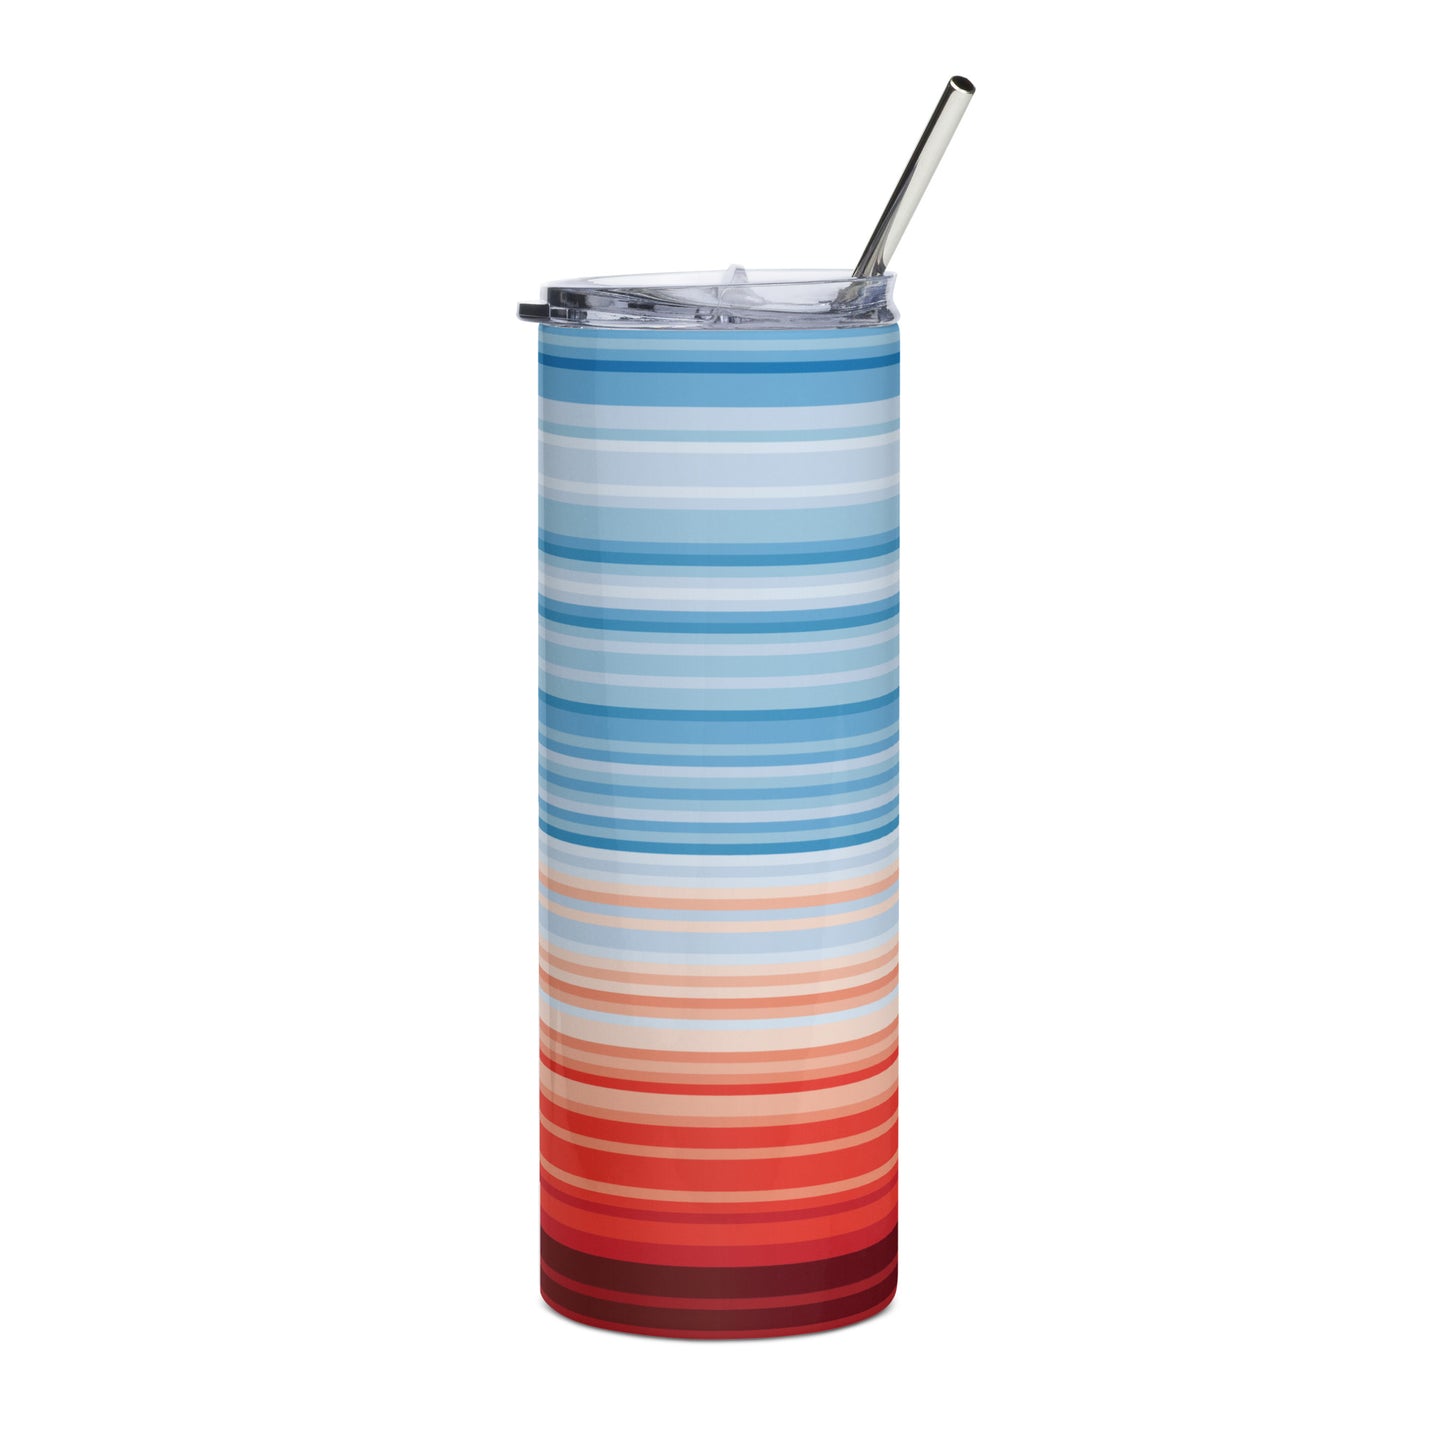 Climate Change Global Warming Stripes - Sustainably Made Stainless steel tumbler